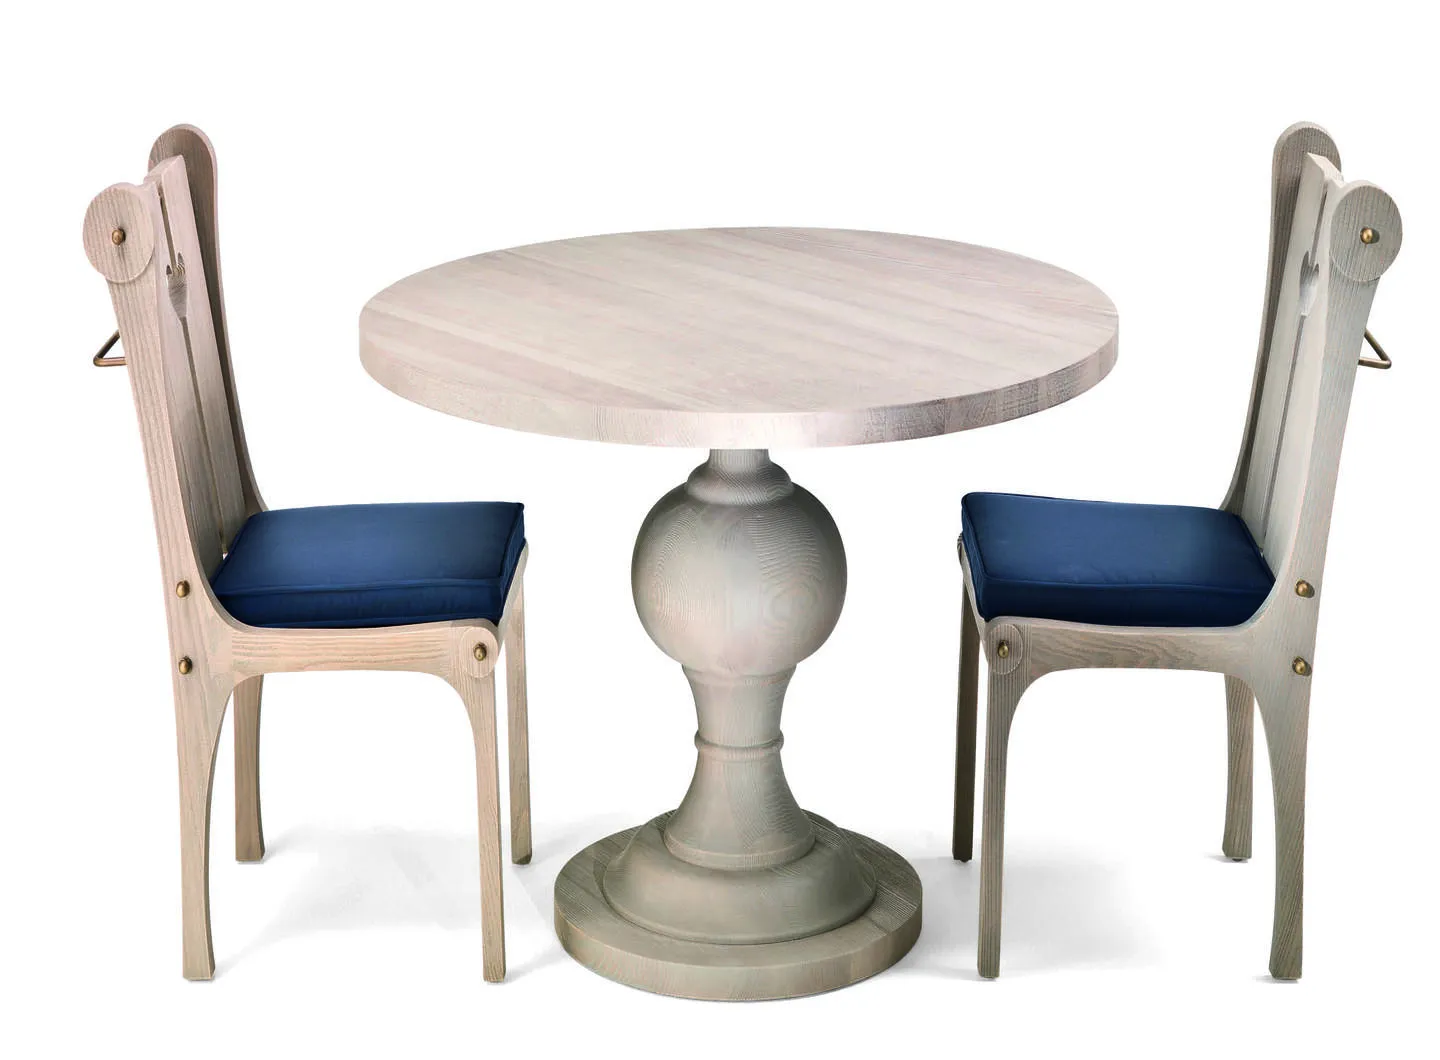 Toula chair and Ferne table